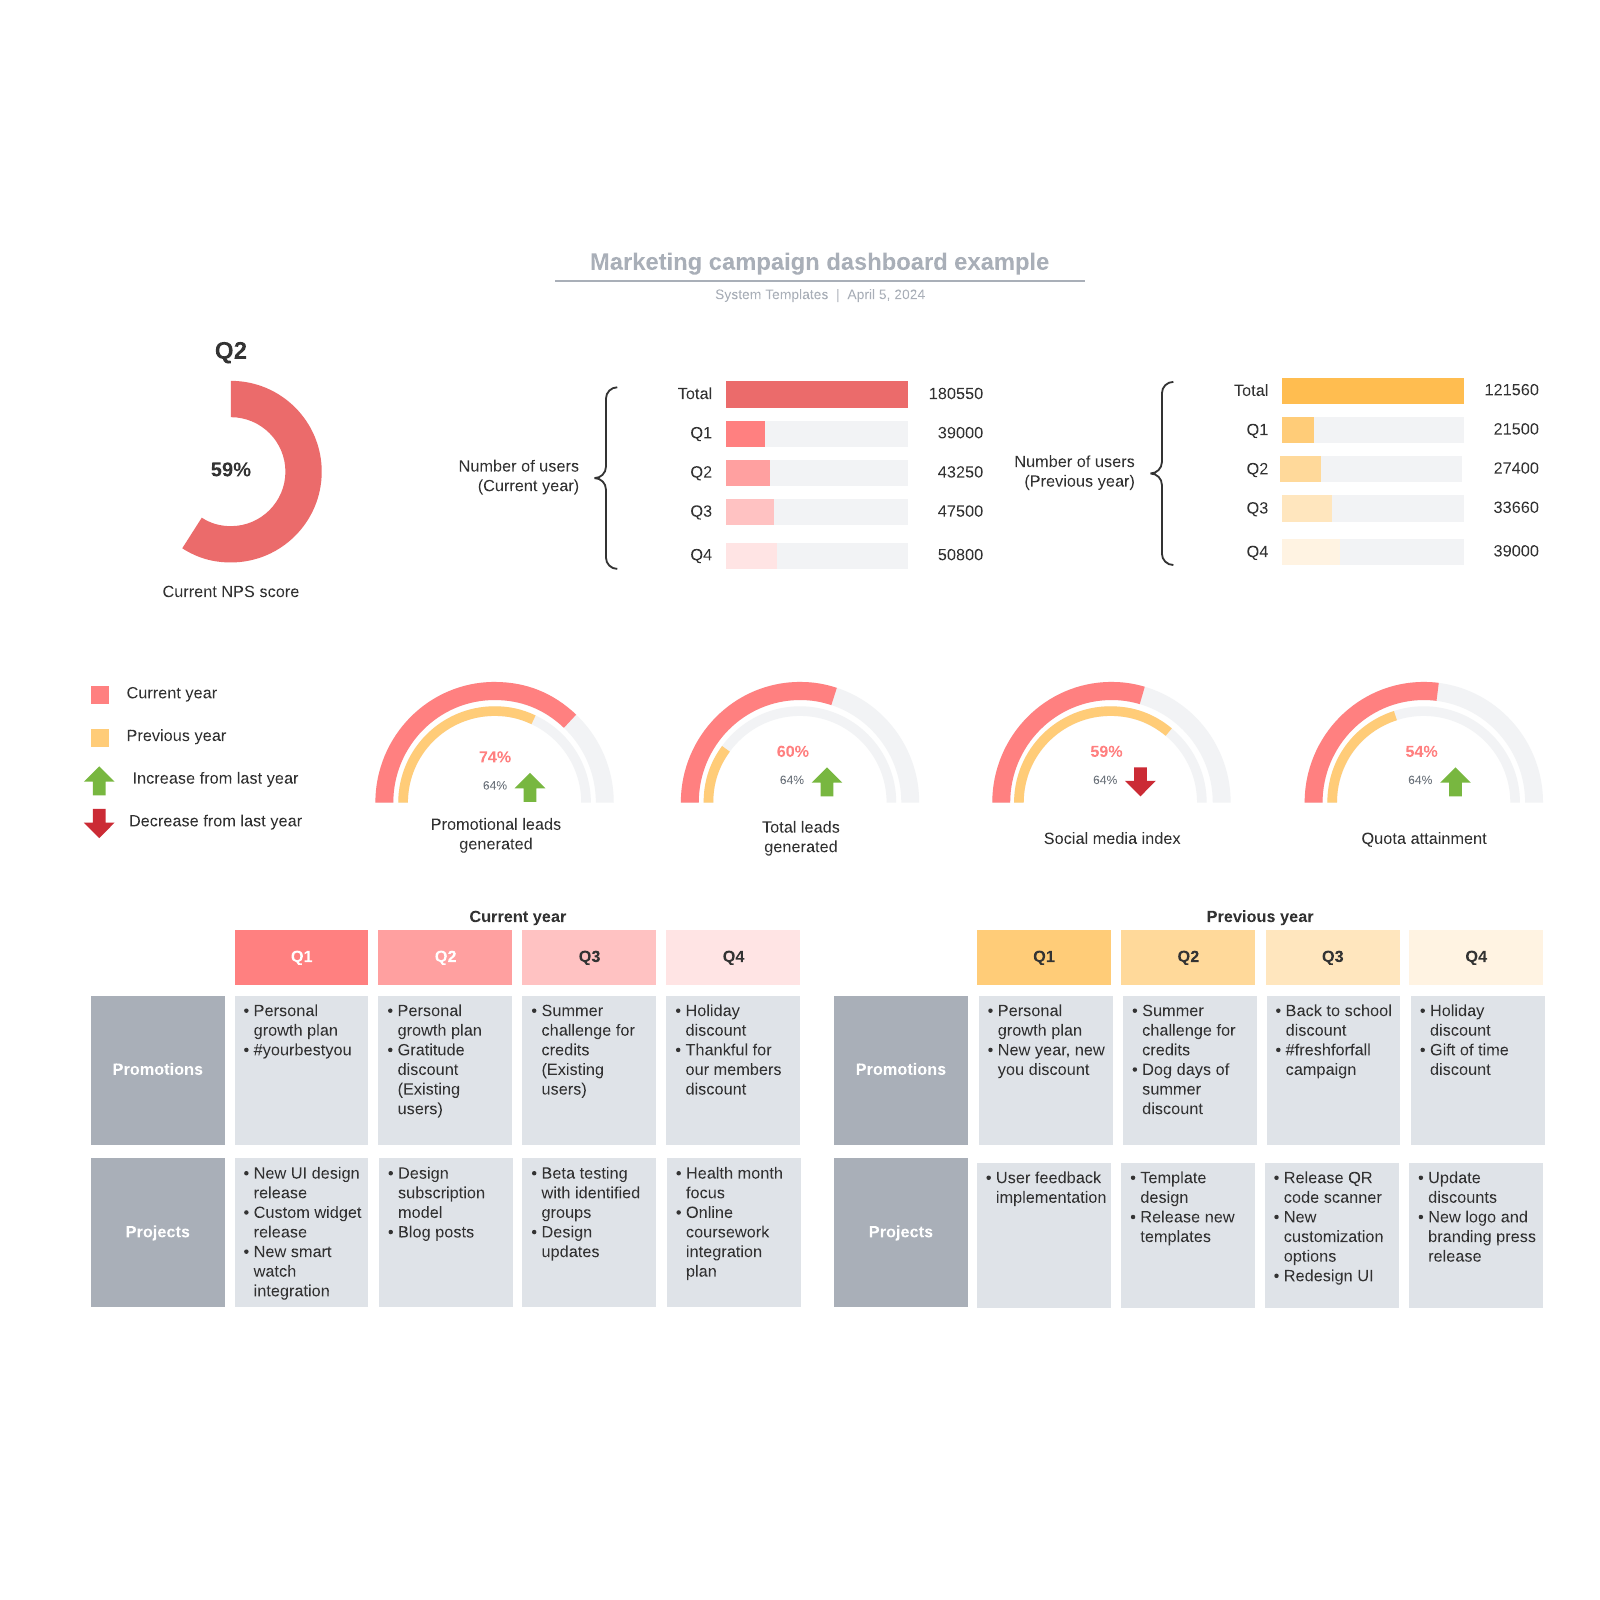 Marketing campaign dashboard example example